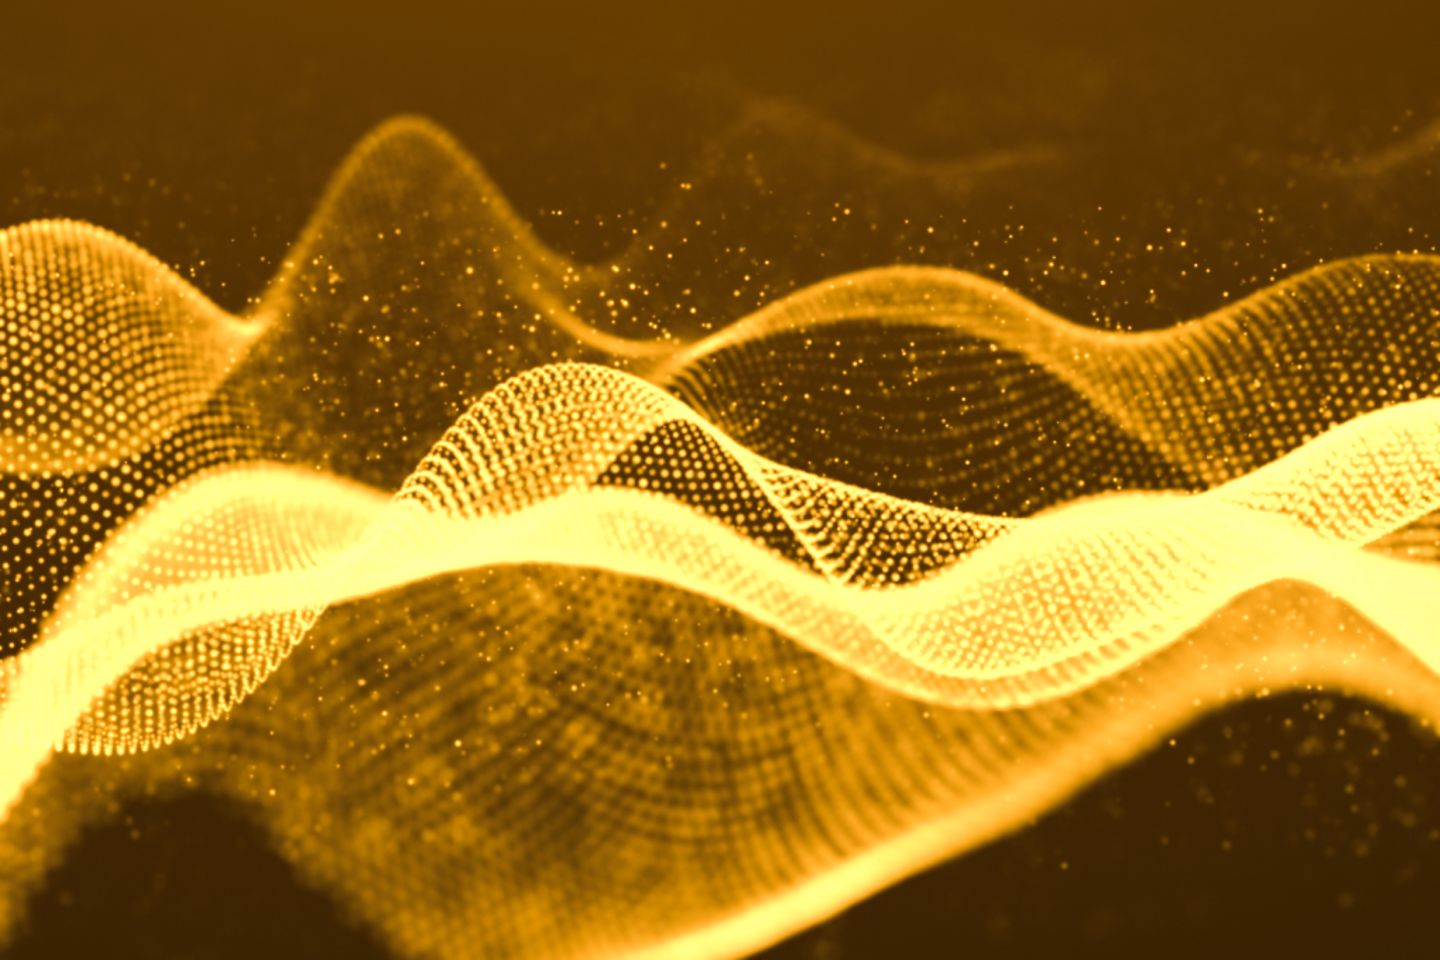 Wavy lines in a net structure in yellow and orange